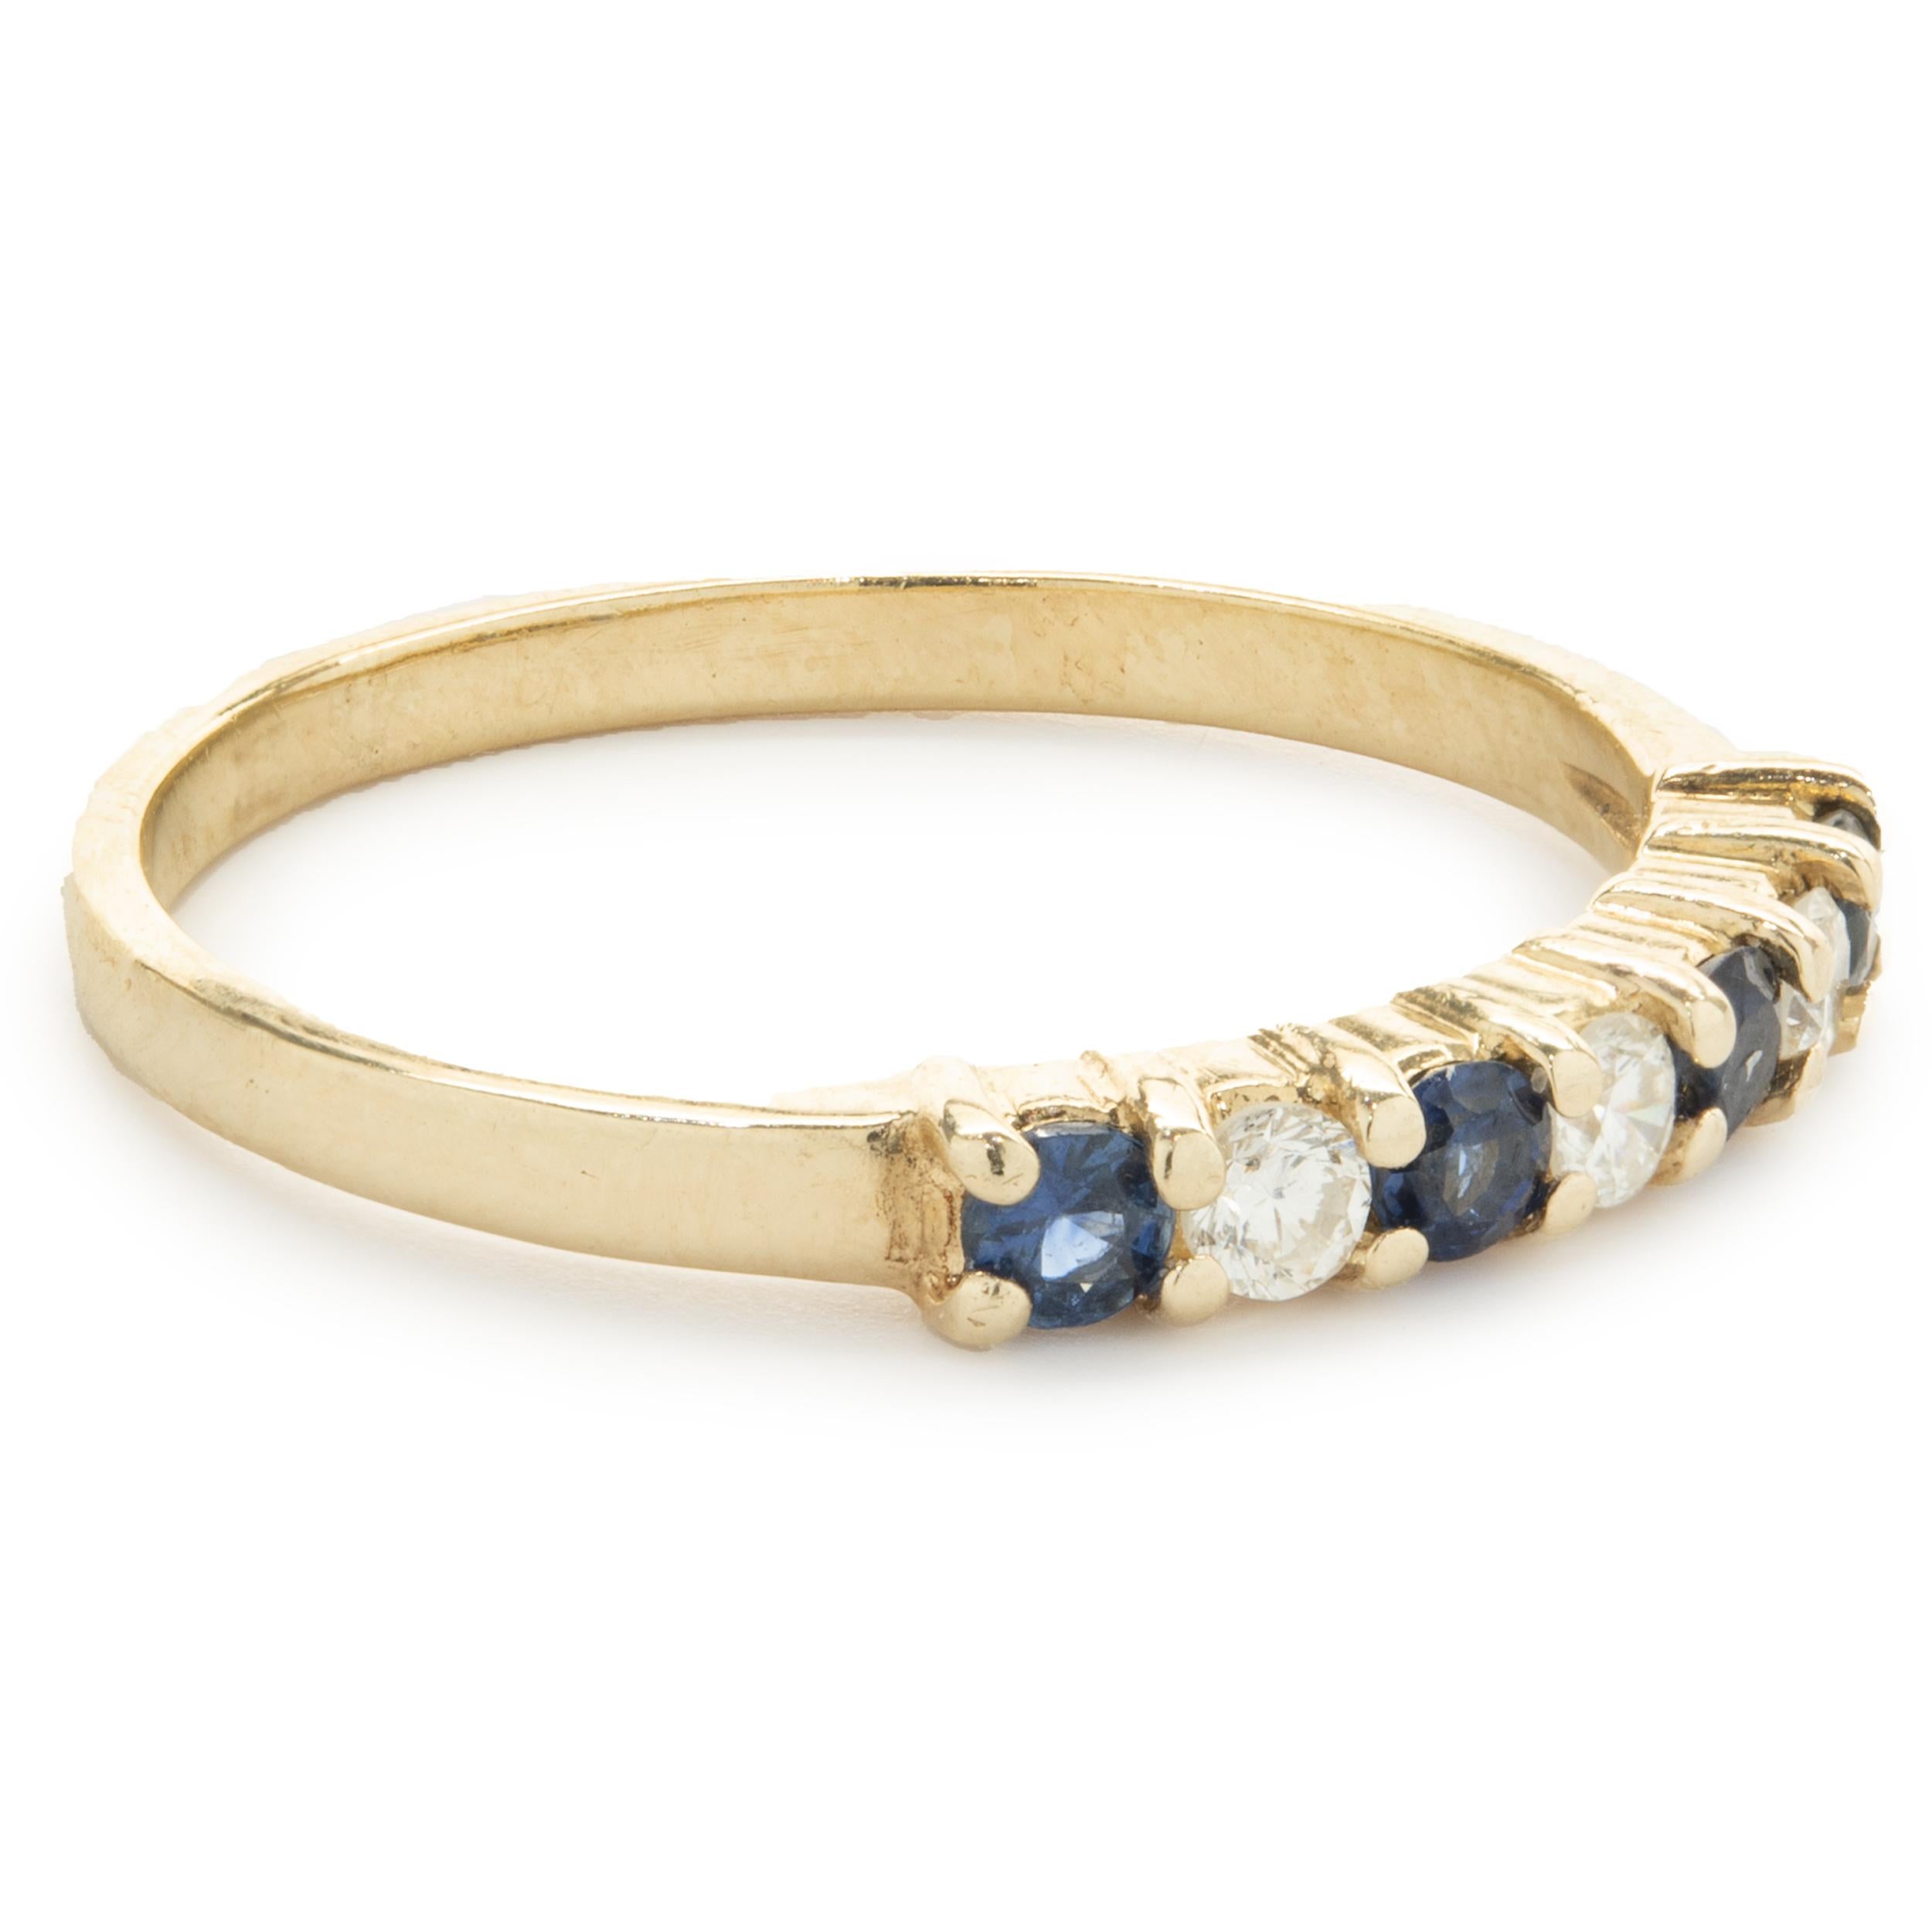 Designer: custom
Material: 14K yellow gold
Diamond: 3 round brilliant cut = .09cttw
Color: I
Clarity: SI1
Sapphire: 4 round cut = .17cttw
Dimensions: ring top measures 2.60mm
Ring Size: 5.5 (complimentary sizing available)
Weight: 1.52 grams